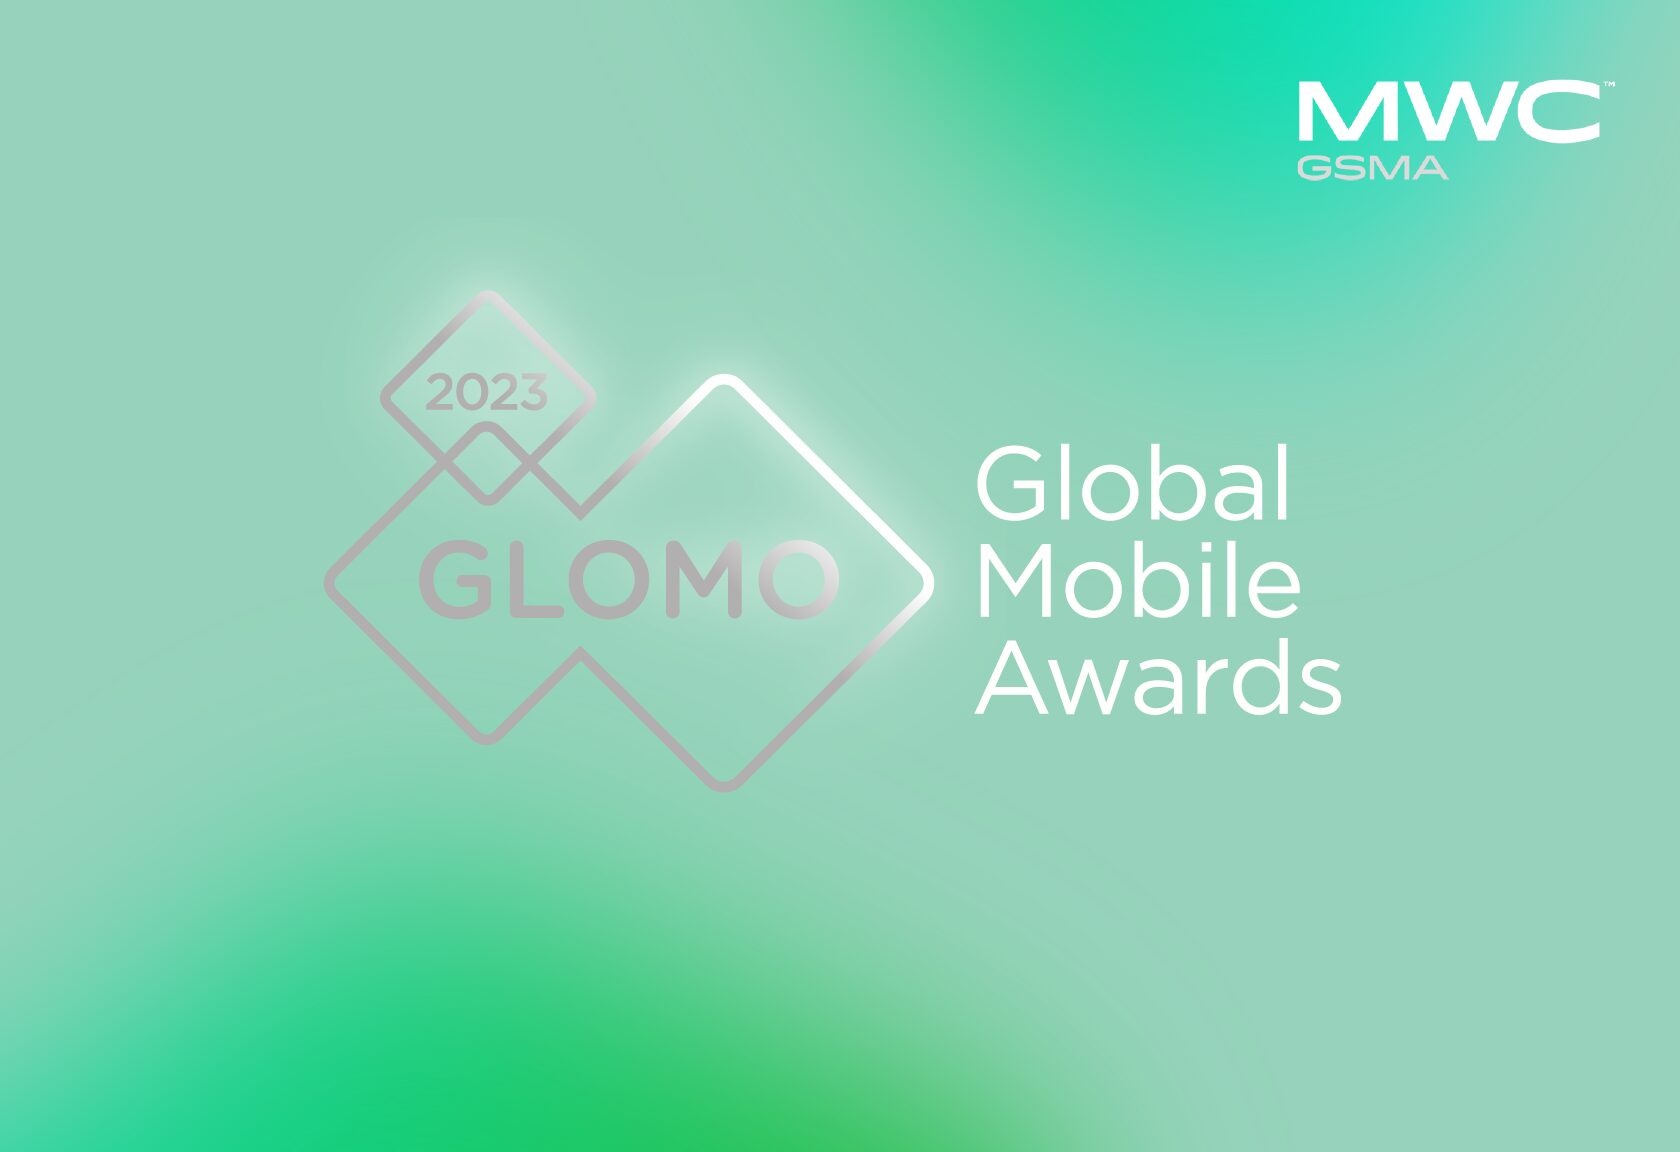 Wiliot Wins GLOMO Award for ‘Best Mobile Innovation for Climate Action’ at MWC Barcelona 2023